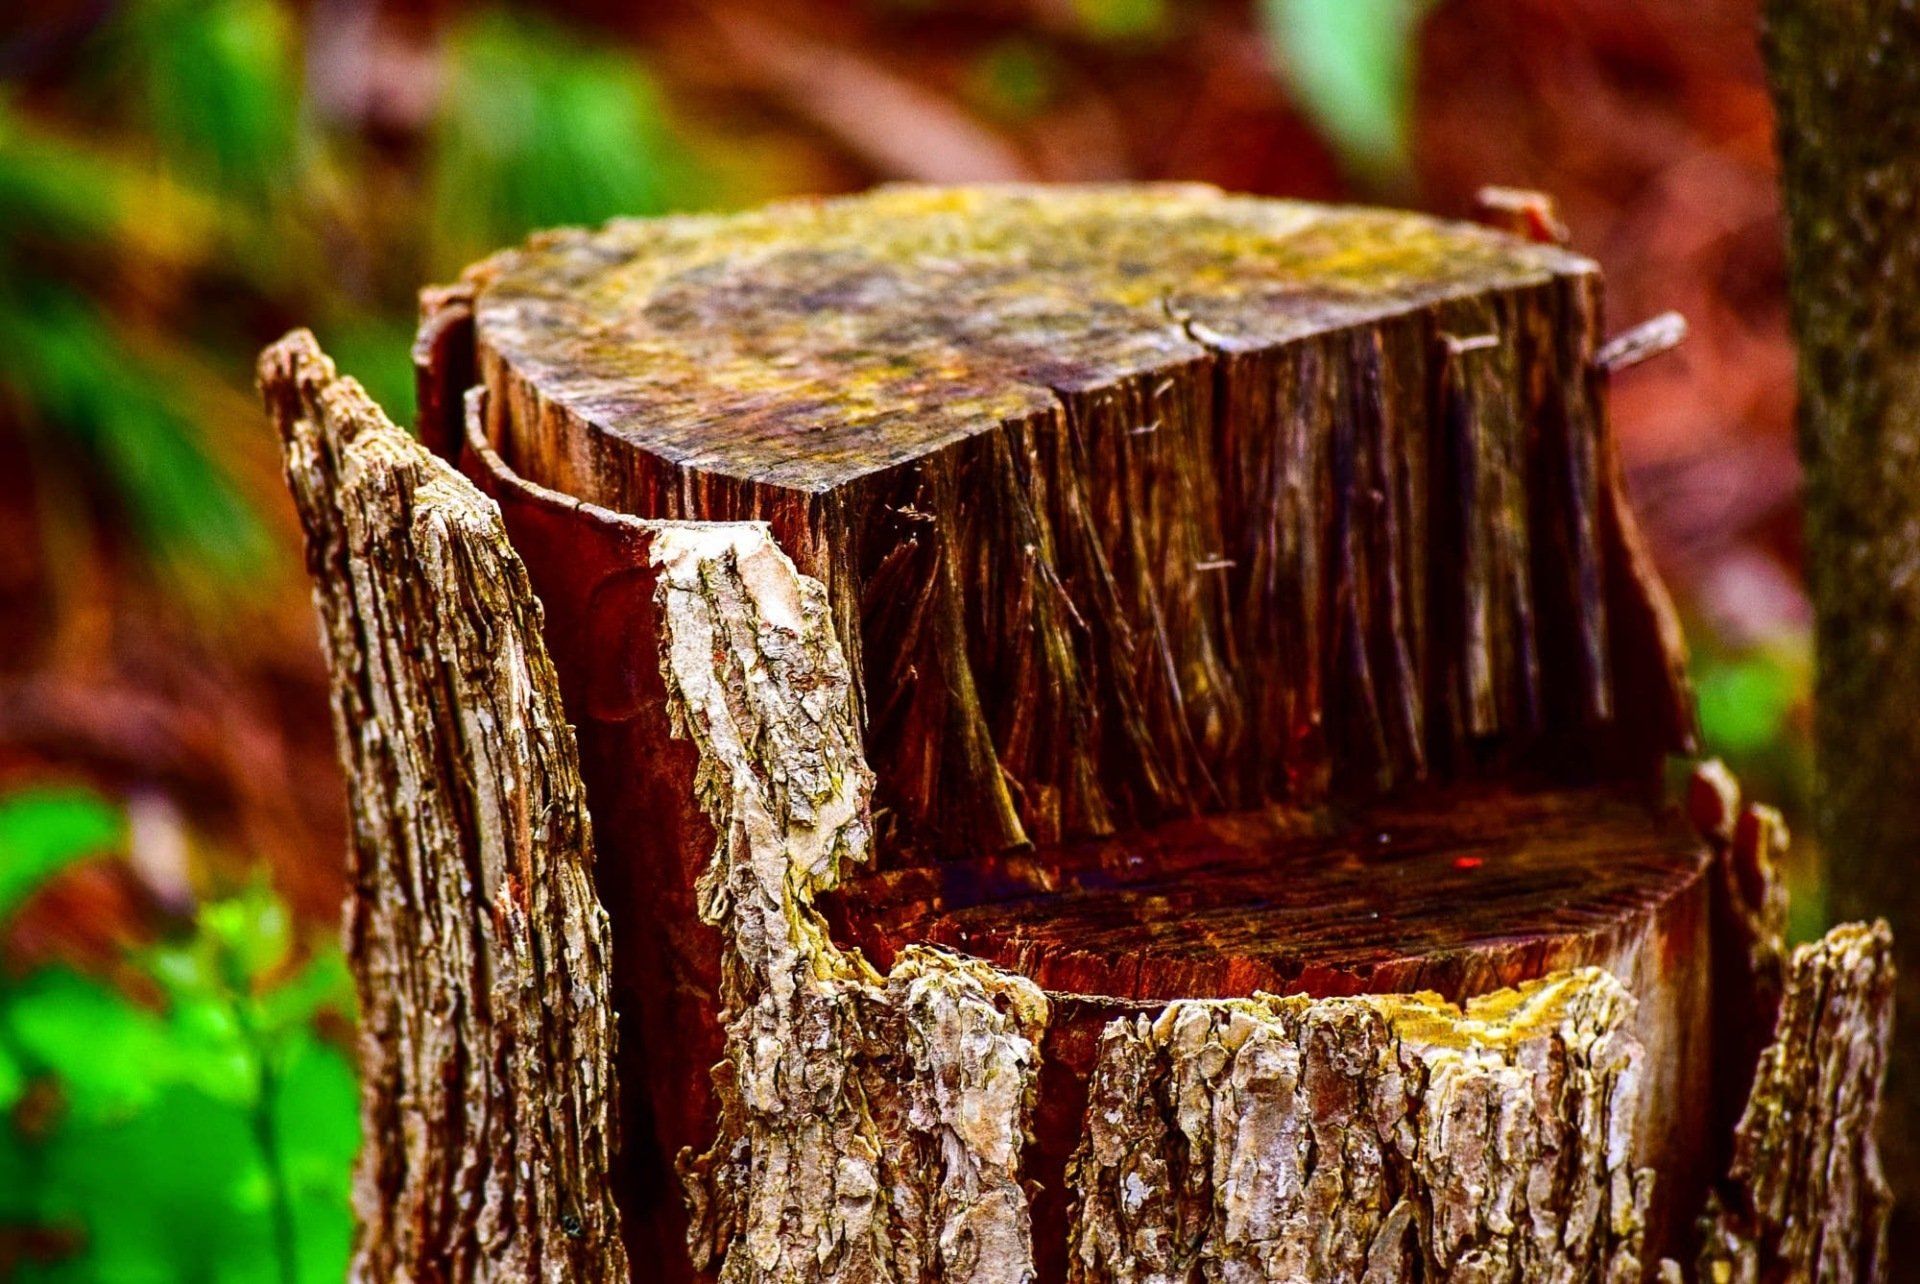 a close up of a tree stump in the woods .